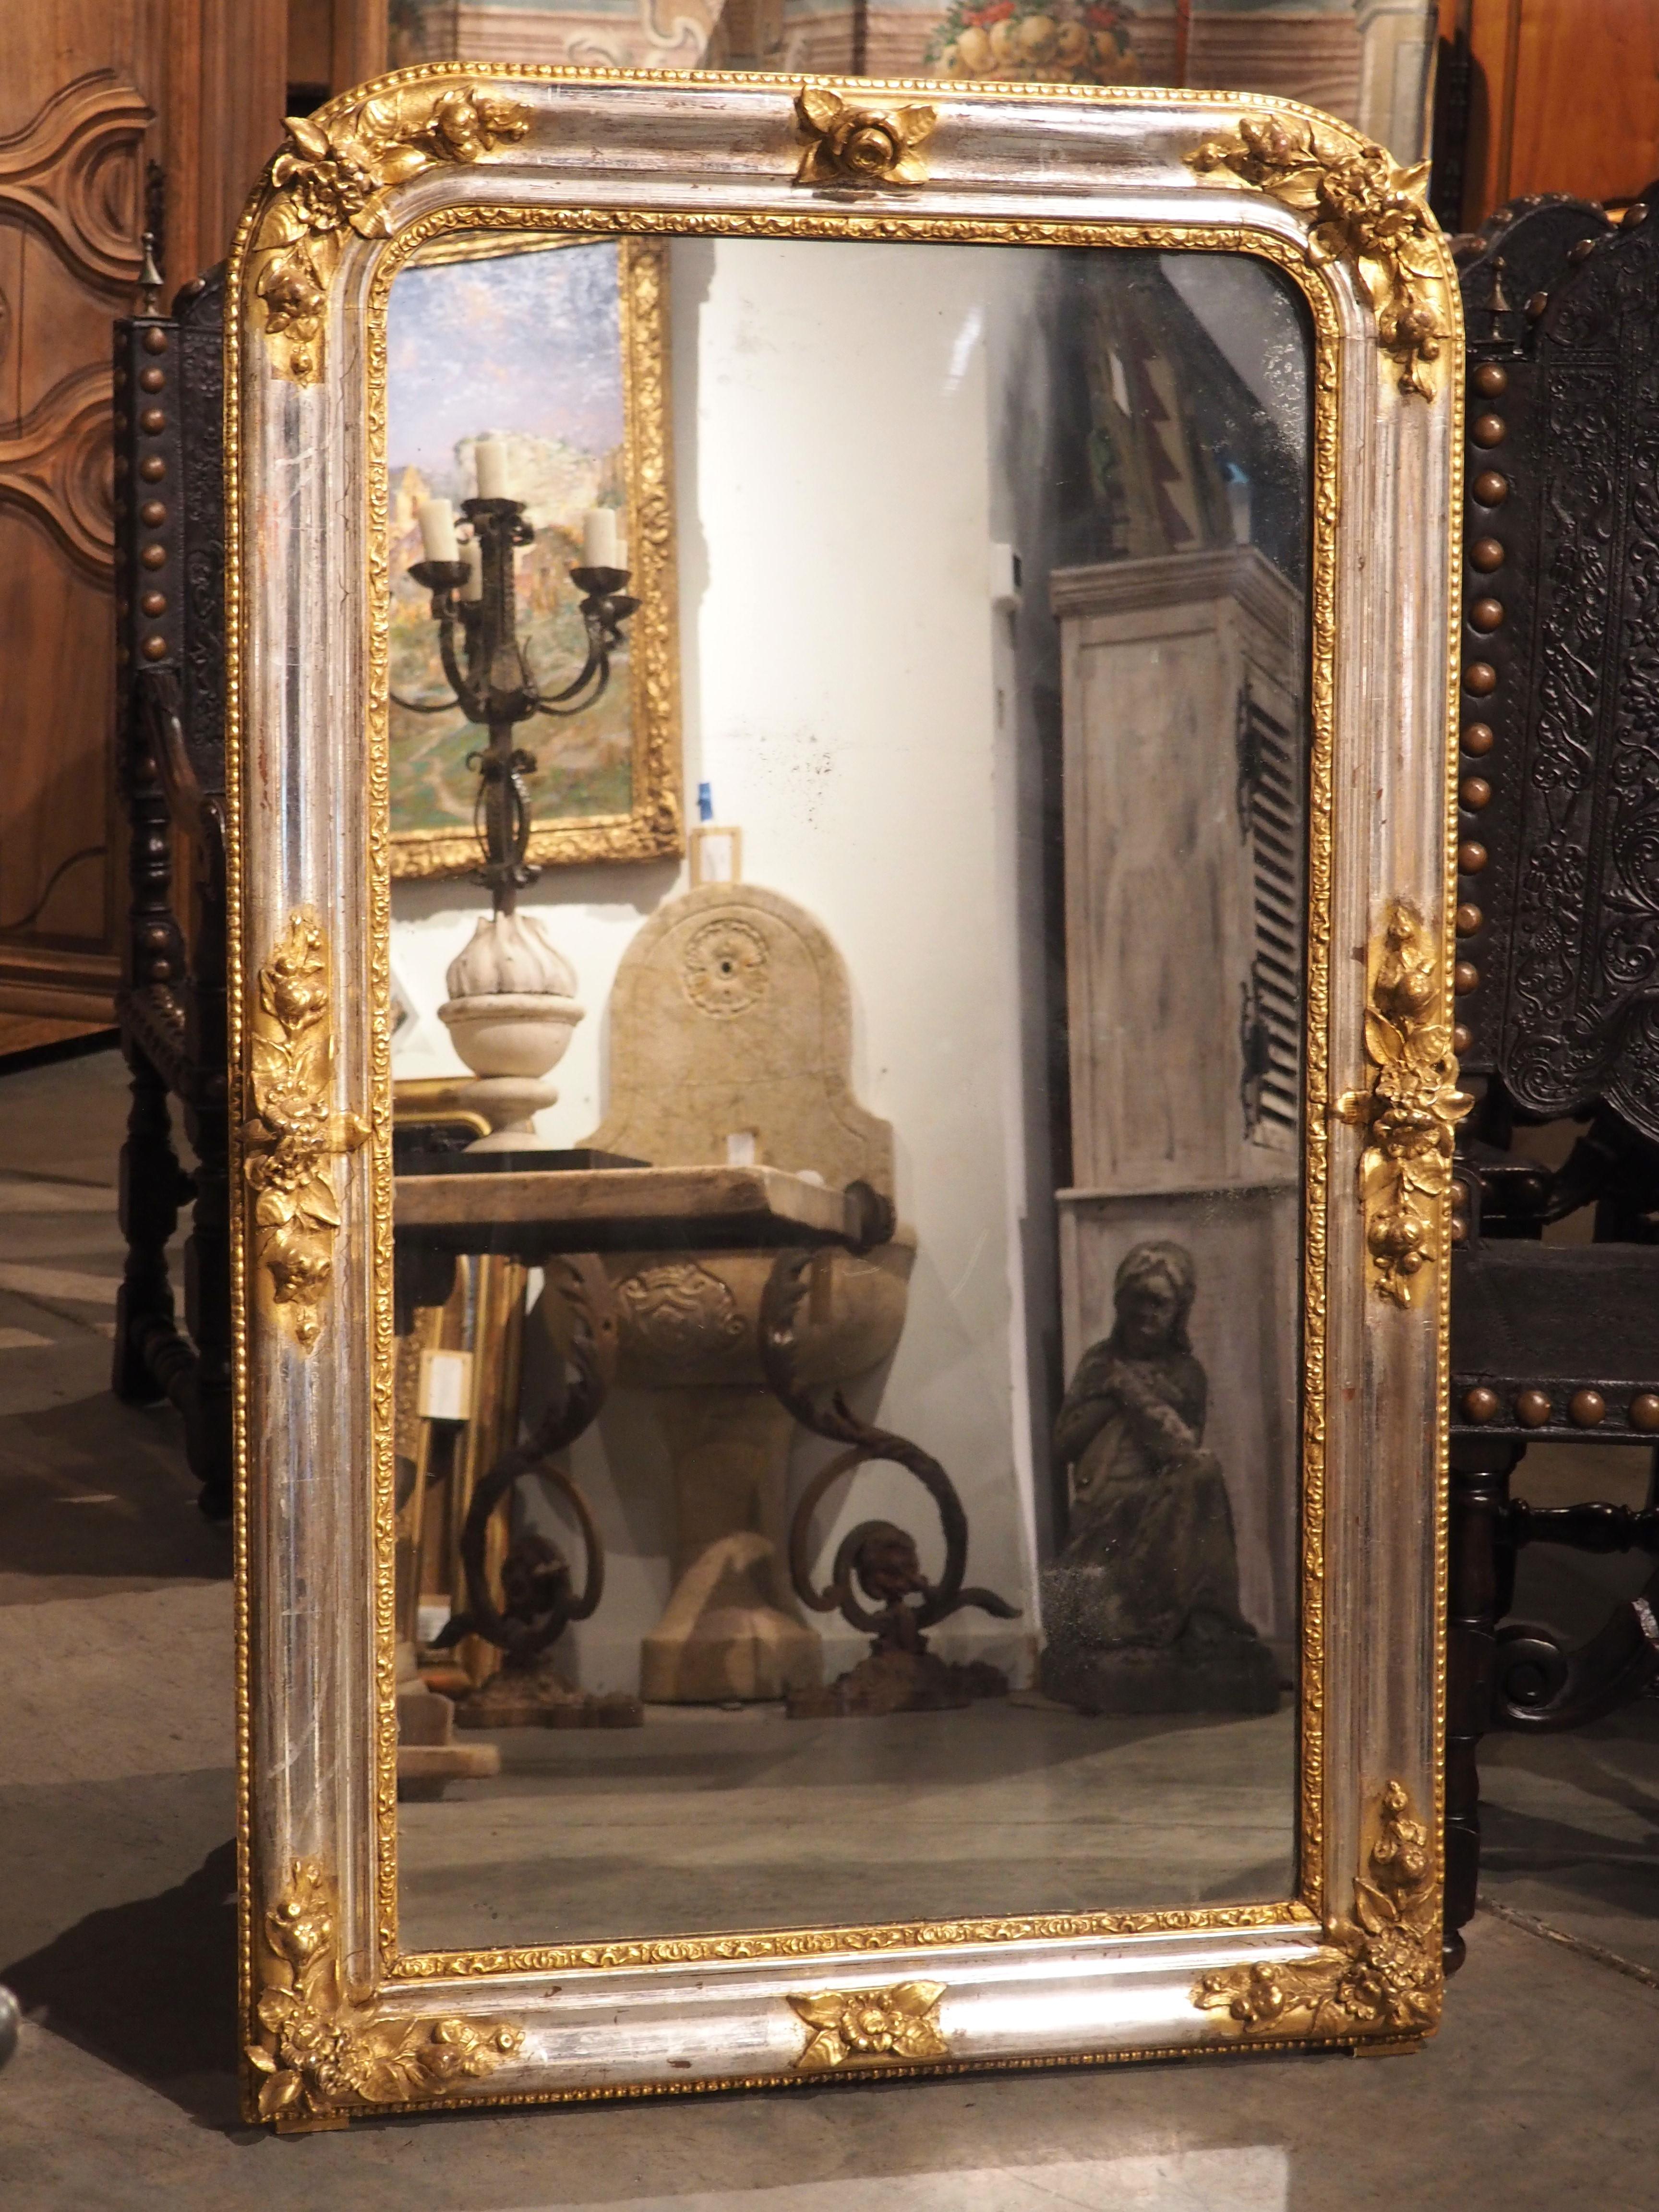 Louis Philippe-style mirrors are instantly recognizable due to their rectilinear frames with rounded top corners. Typically, the carvings are subtle and restrained, but occasionally you will find a piece with more ornate embellishments, such as this